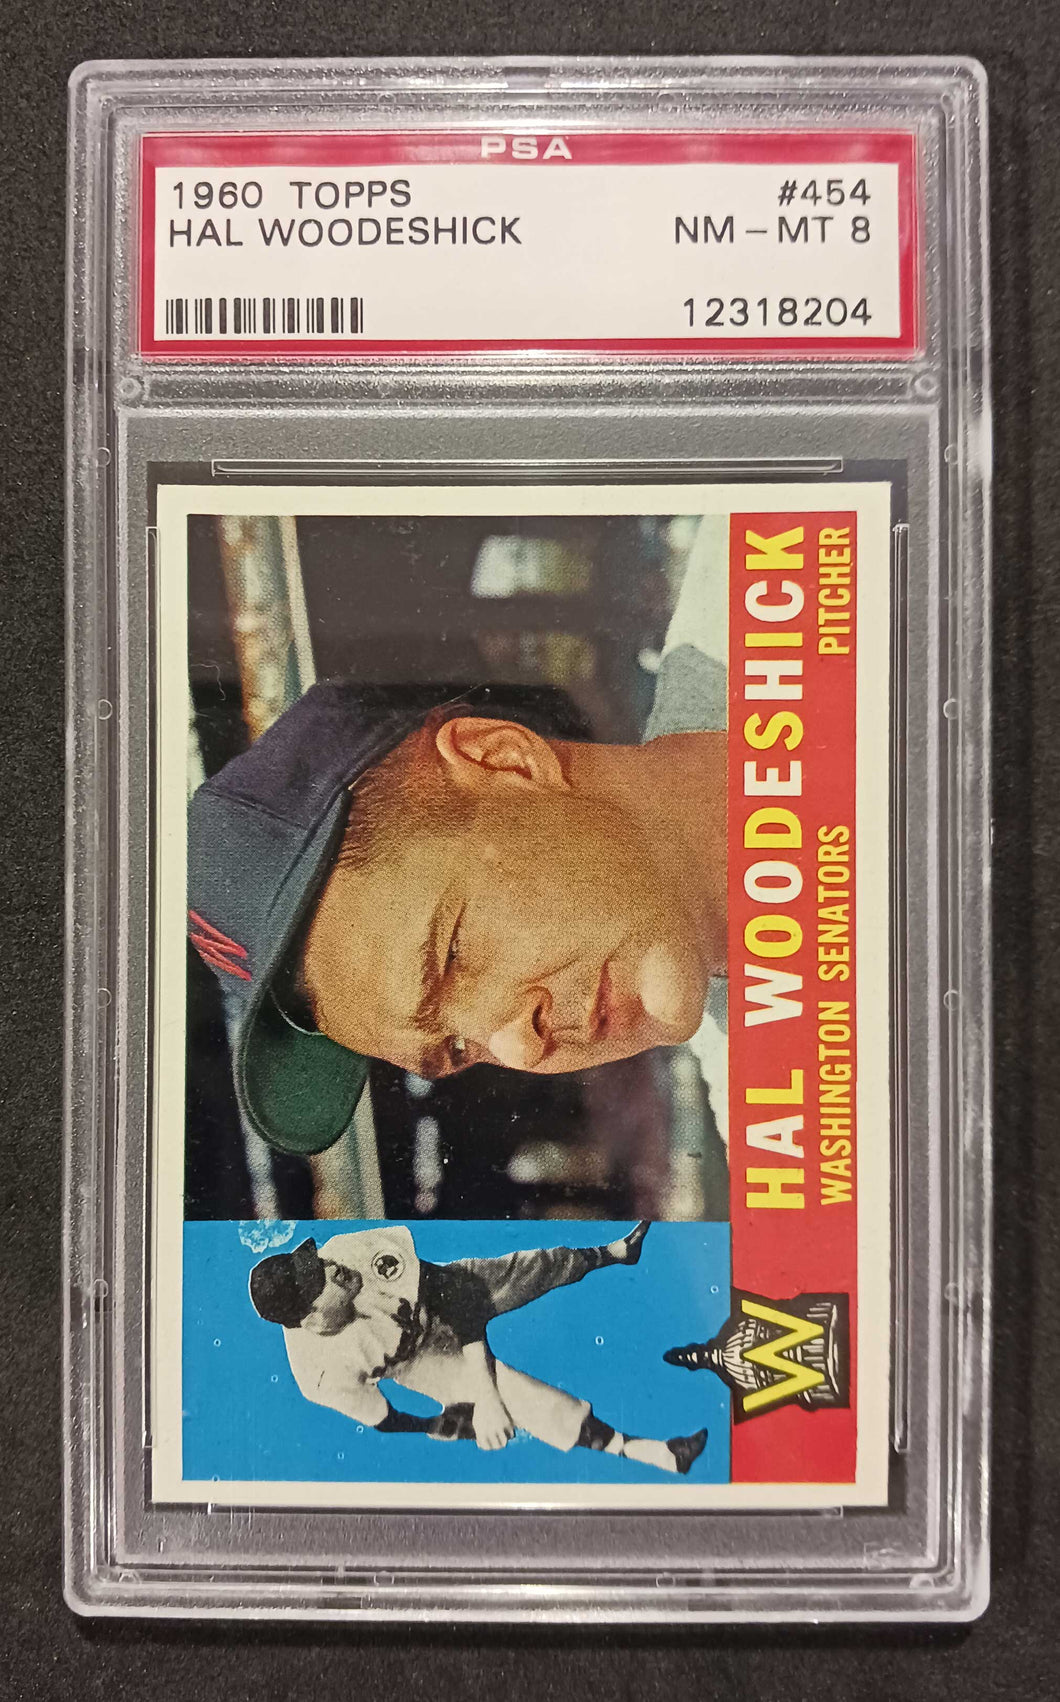 1960 Topps Hal Woodeshick #454 PSA NM - MT 8 (Well Centered)